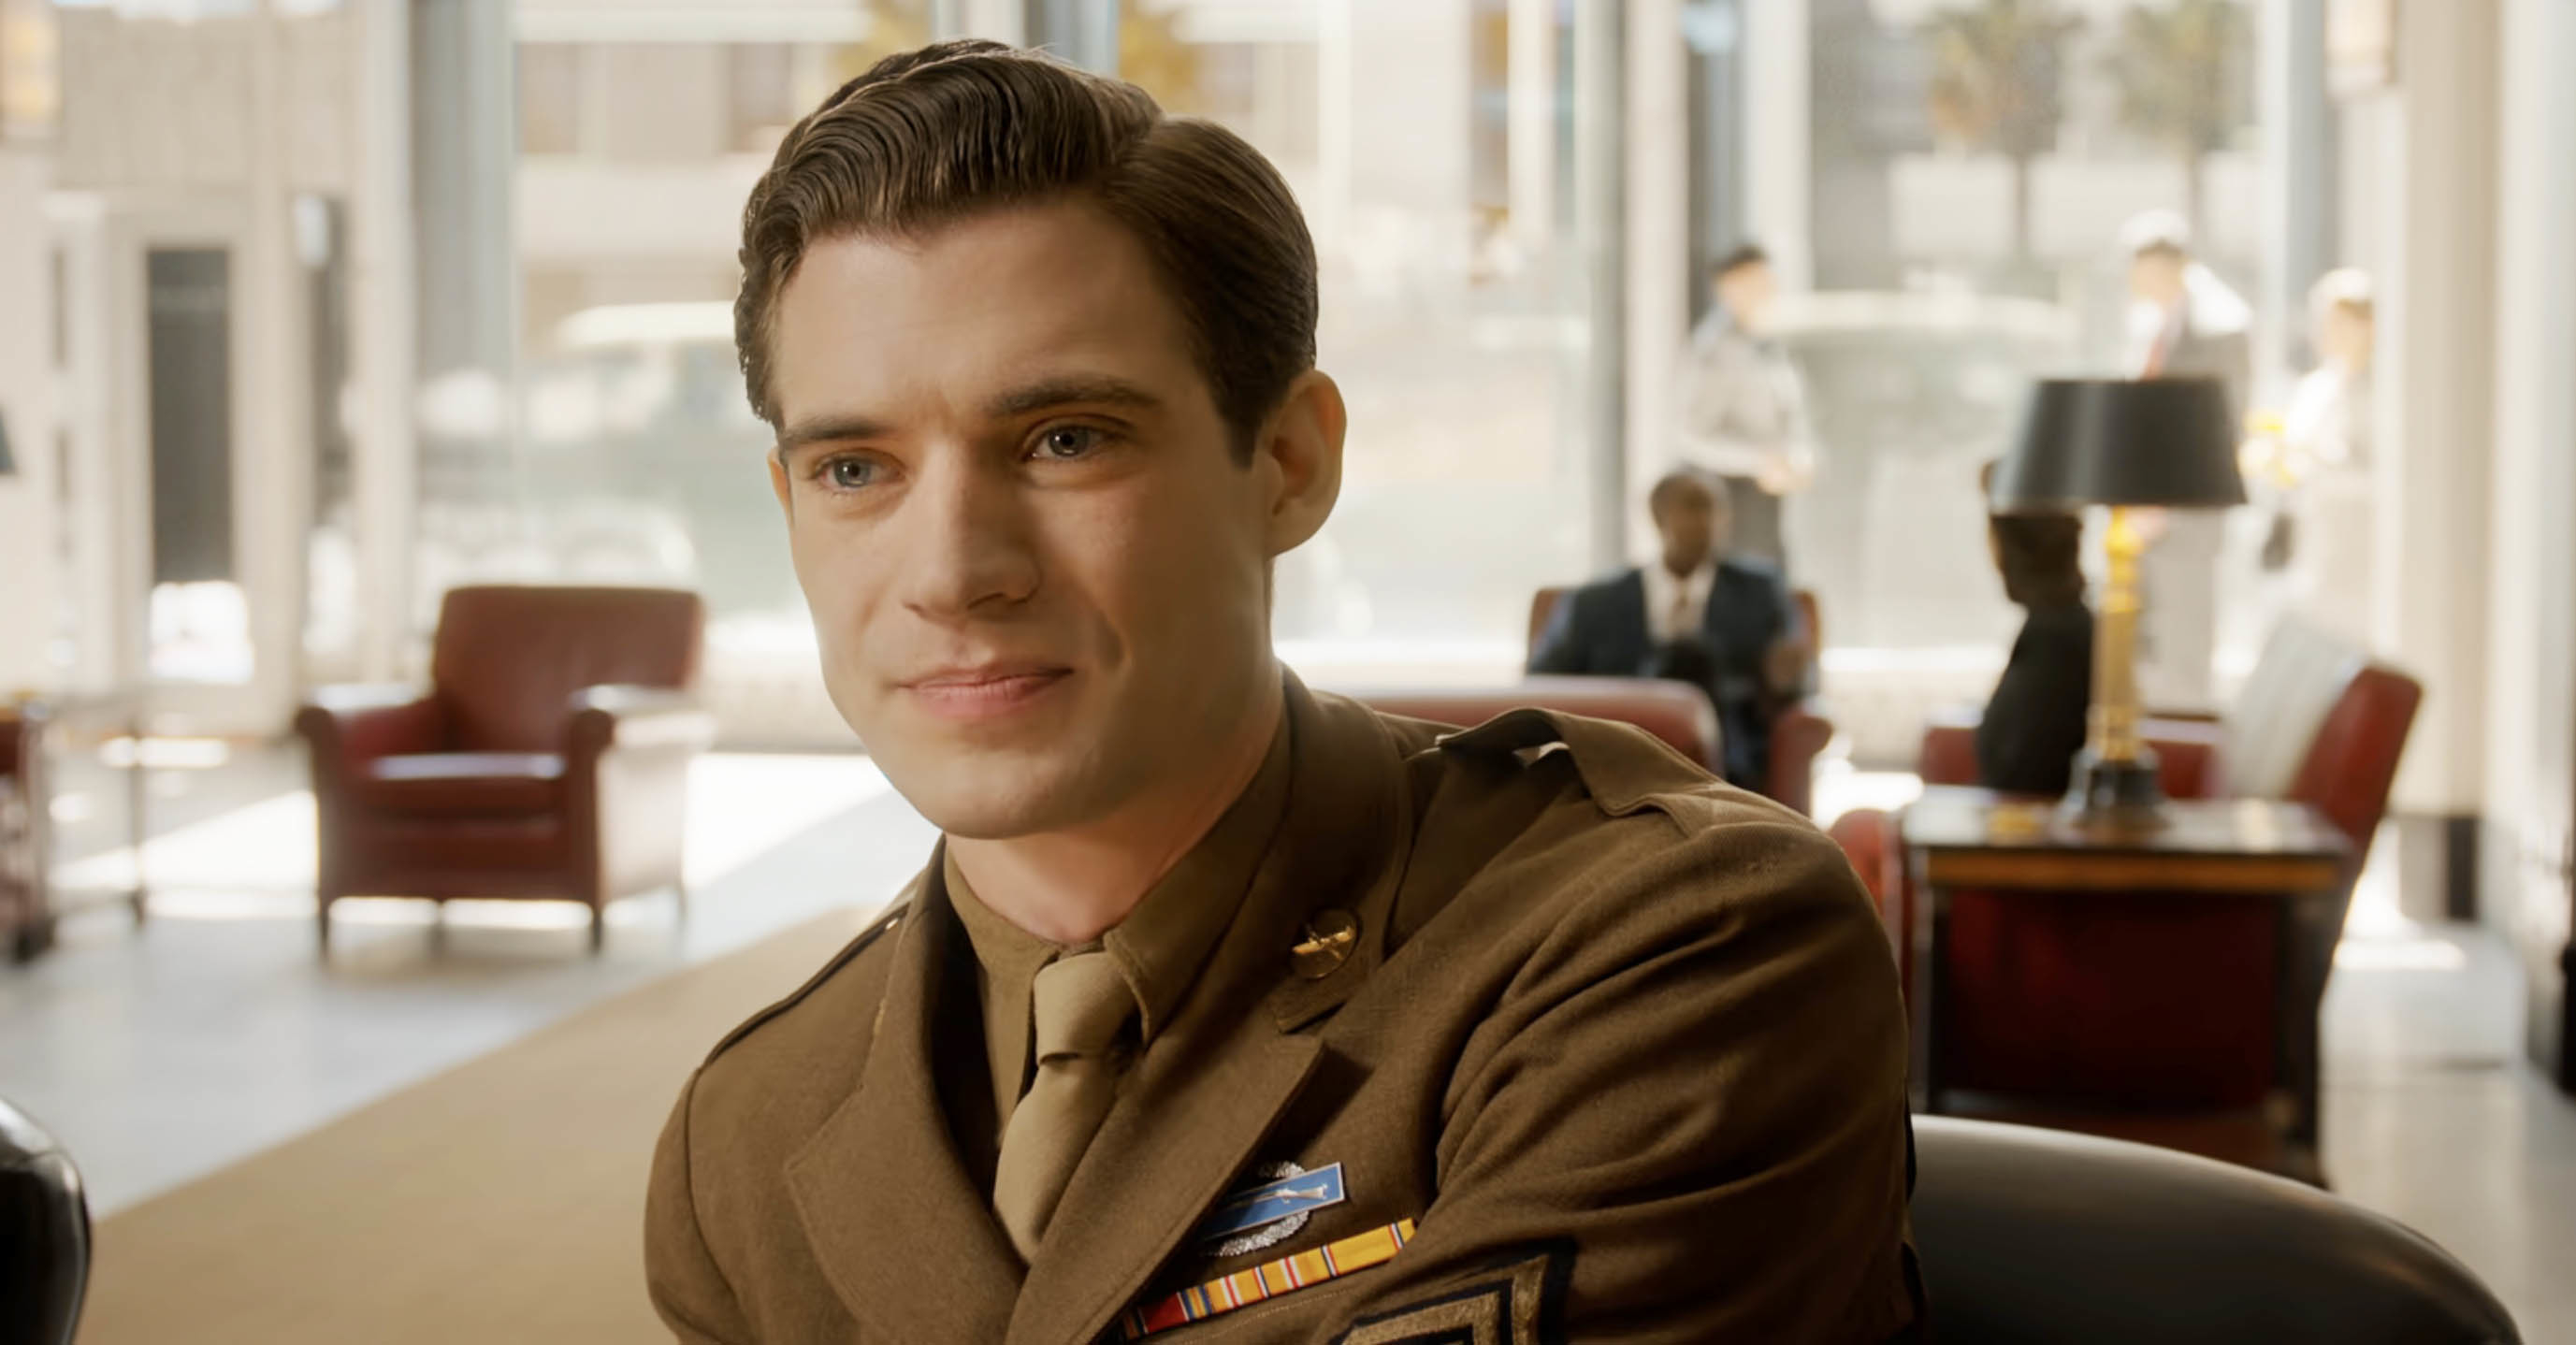 David Corenswet in military uniform in a scene from the miniseries Hollywood